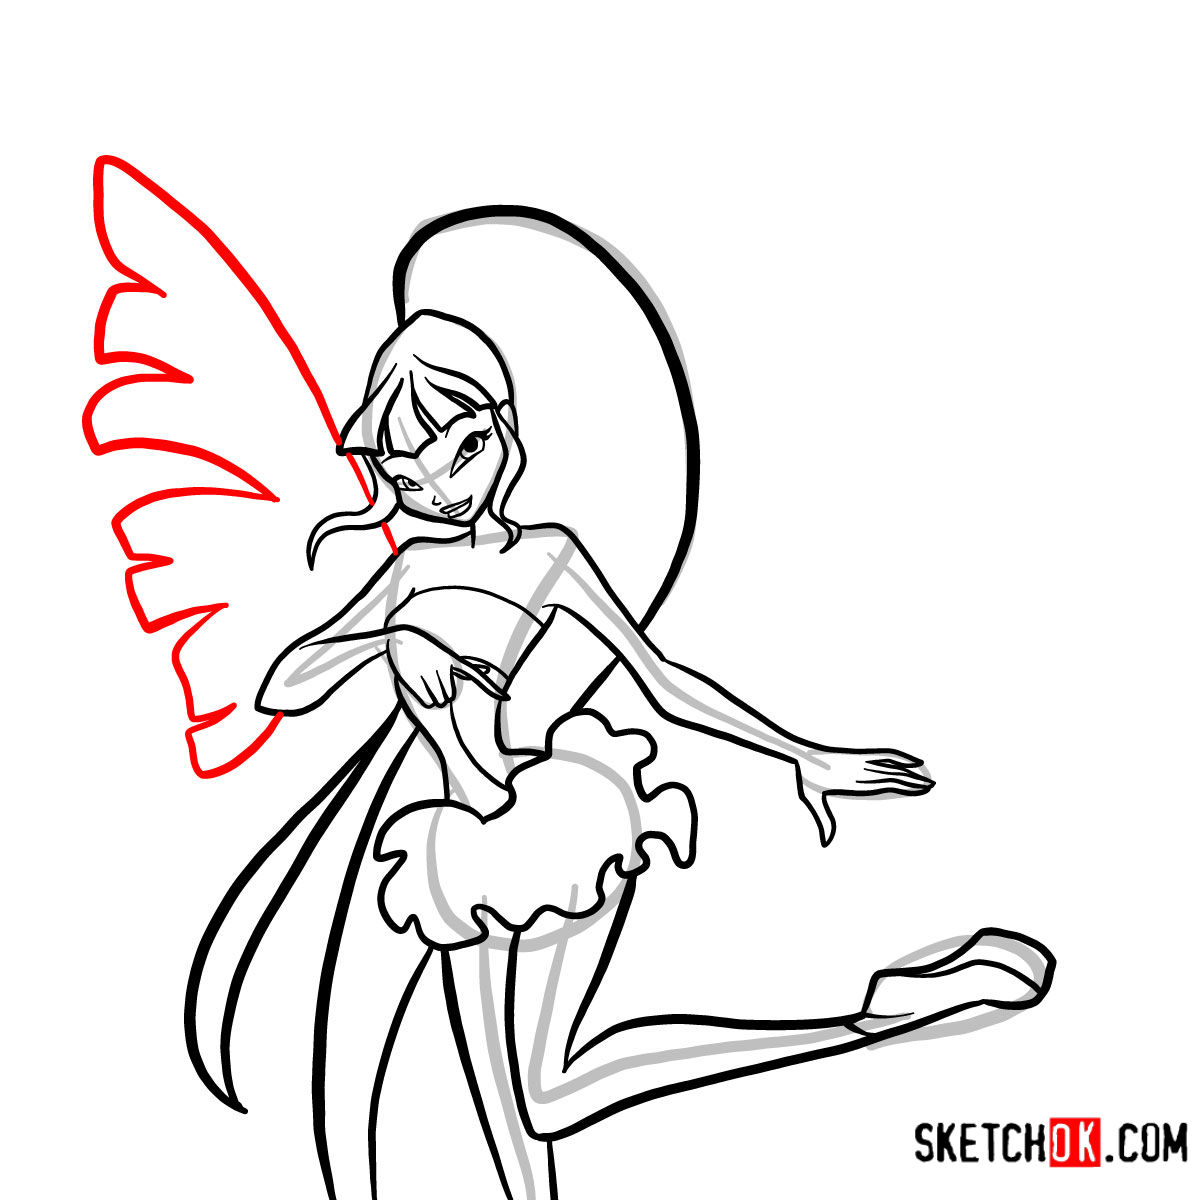 How to draw Musa Serenix from Winx - step 13